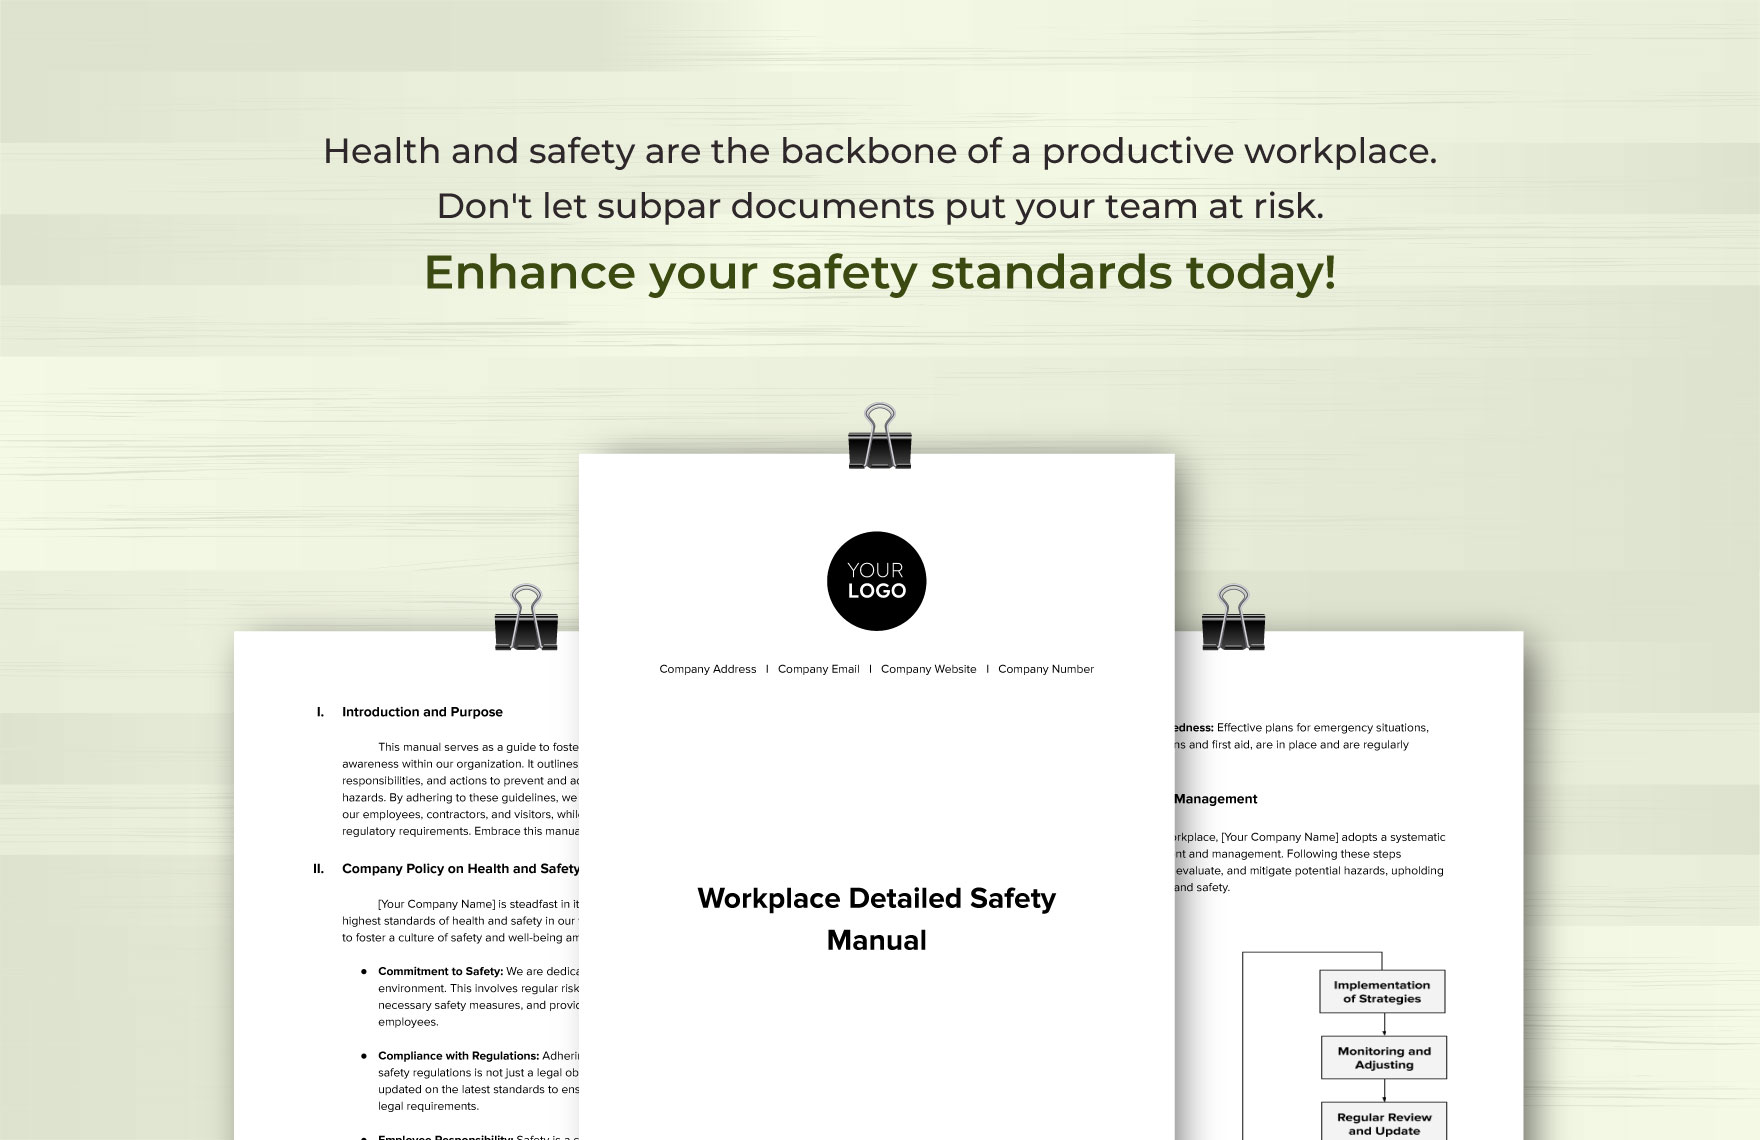 Workplace Detailed Safety Manual Template